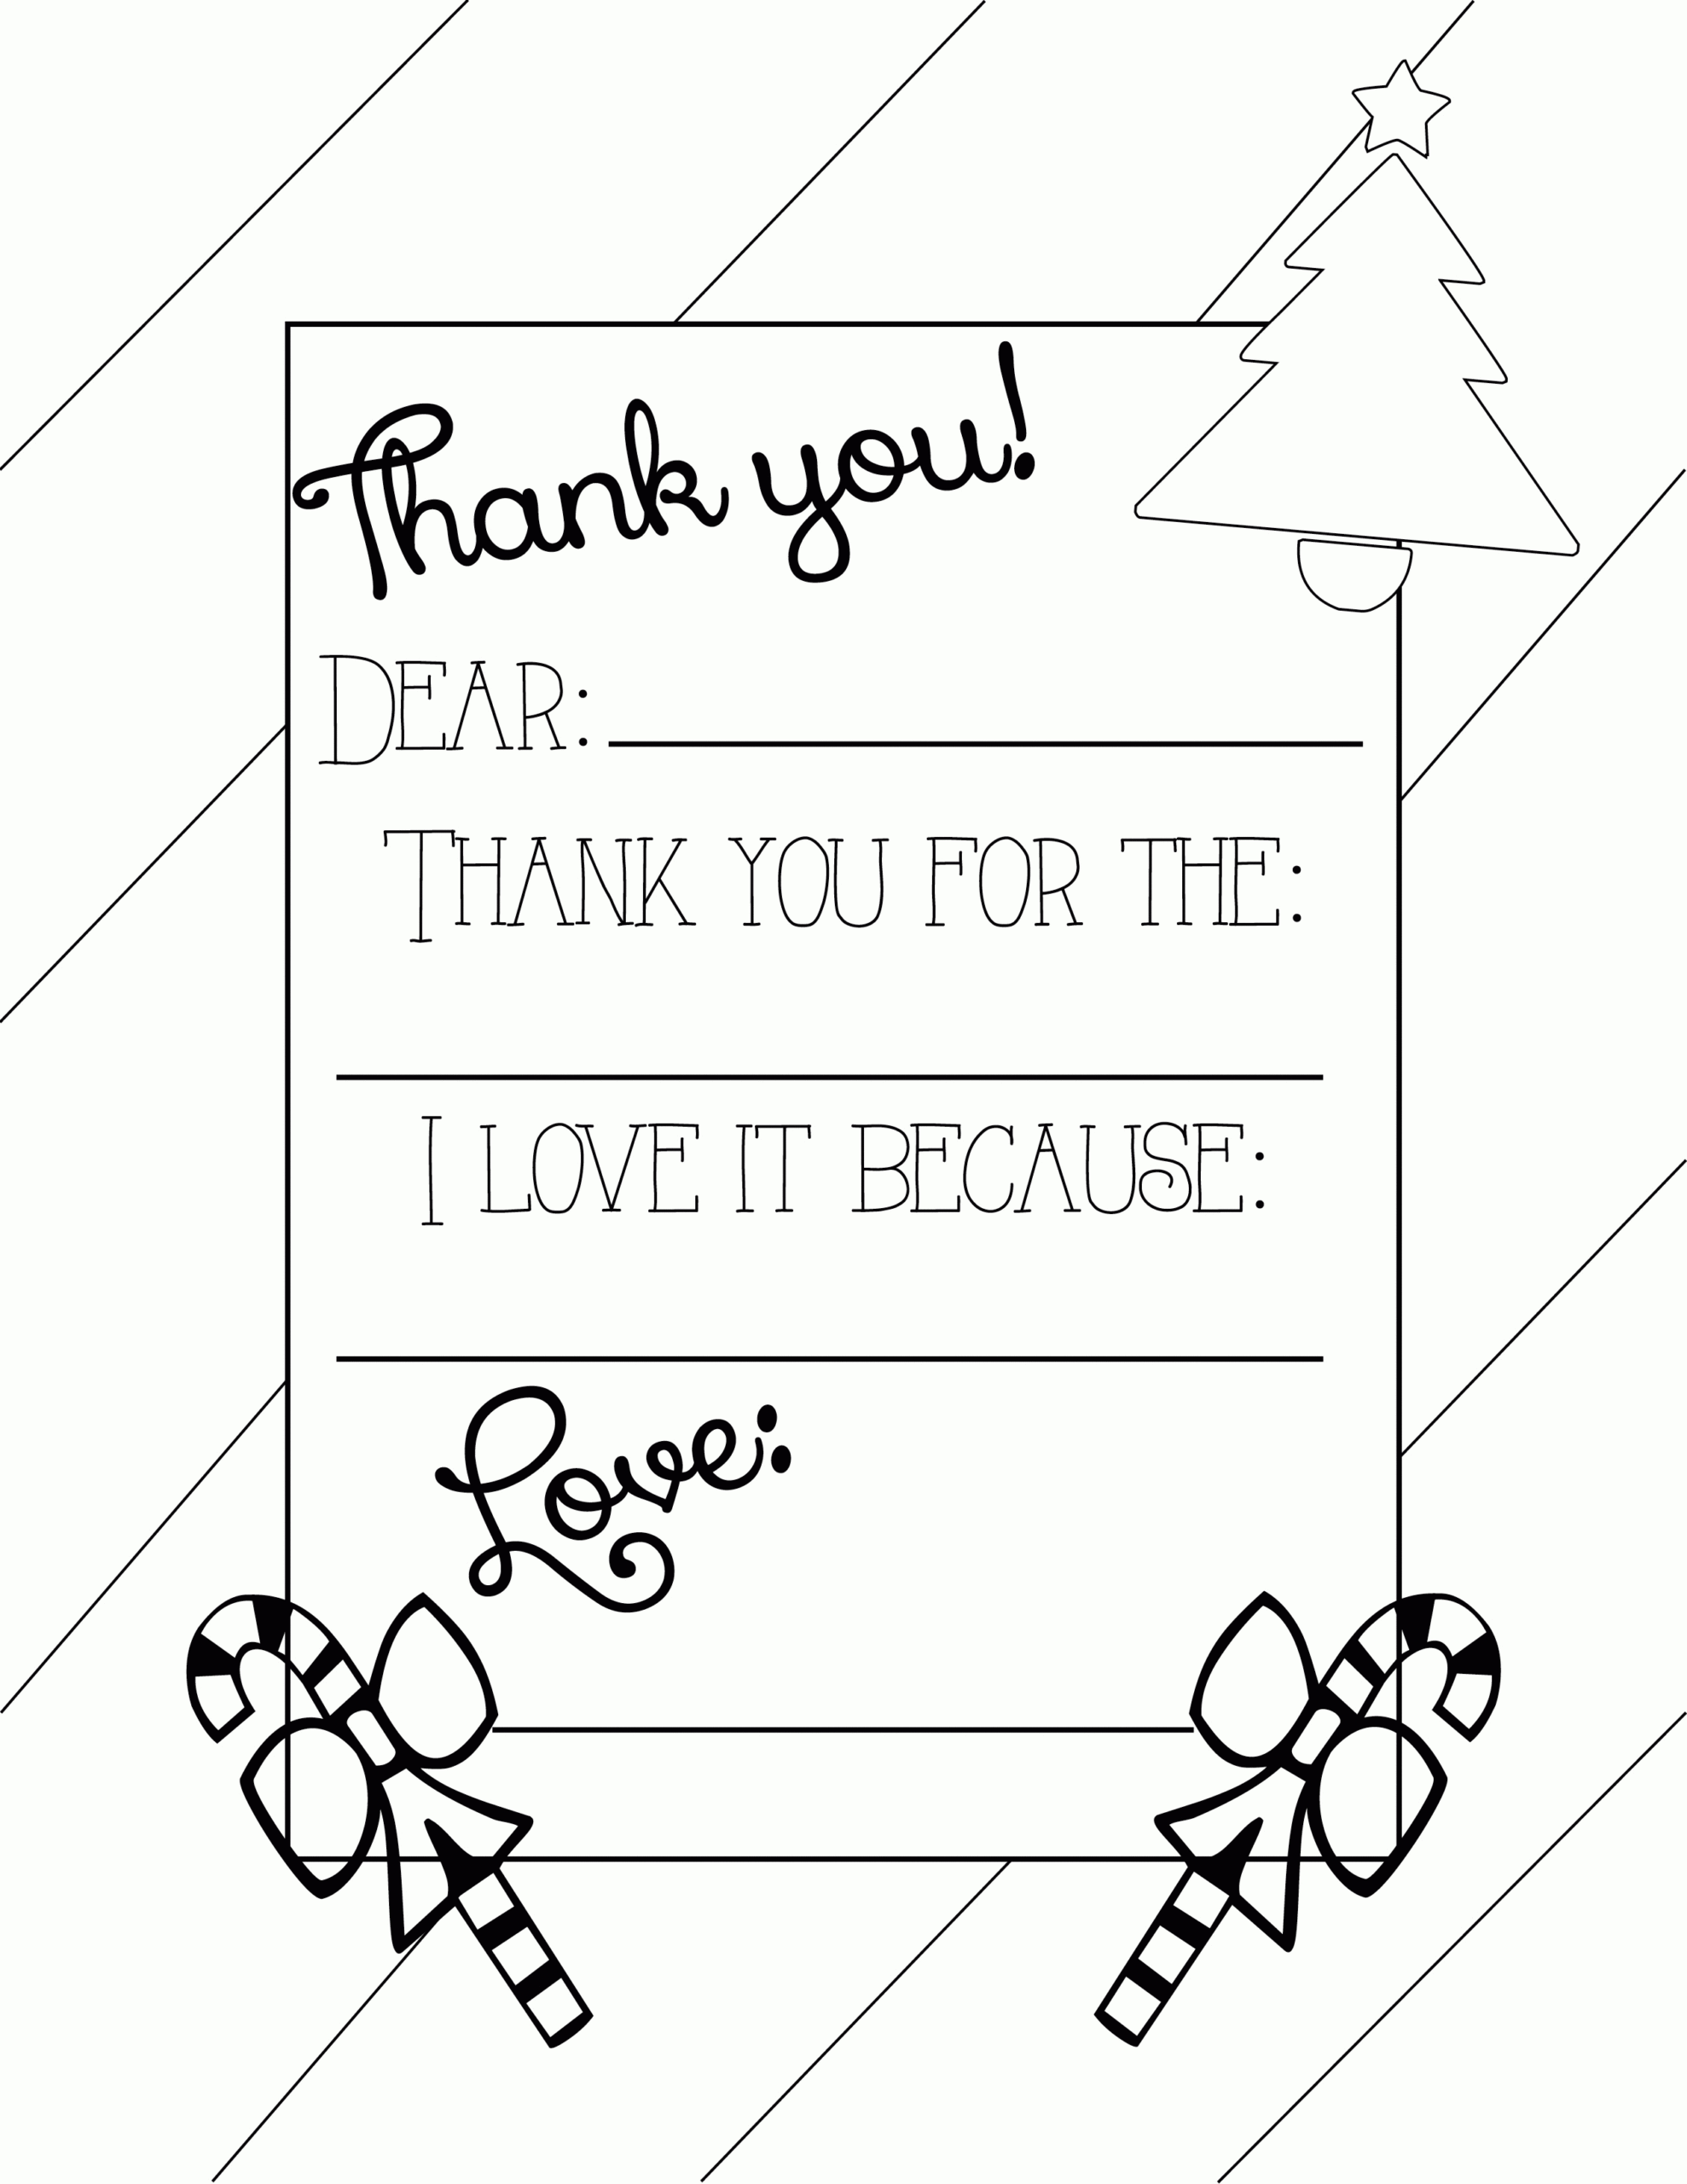 Printable Thank You Cards For Kids: Free Coloring Page In Free Printable Thank You Card Template